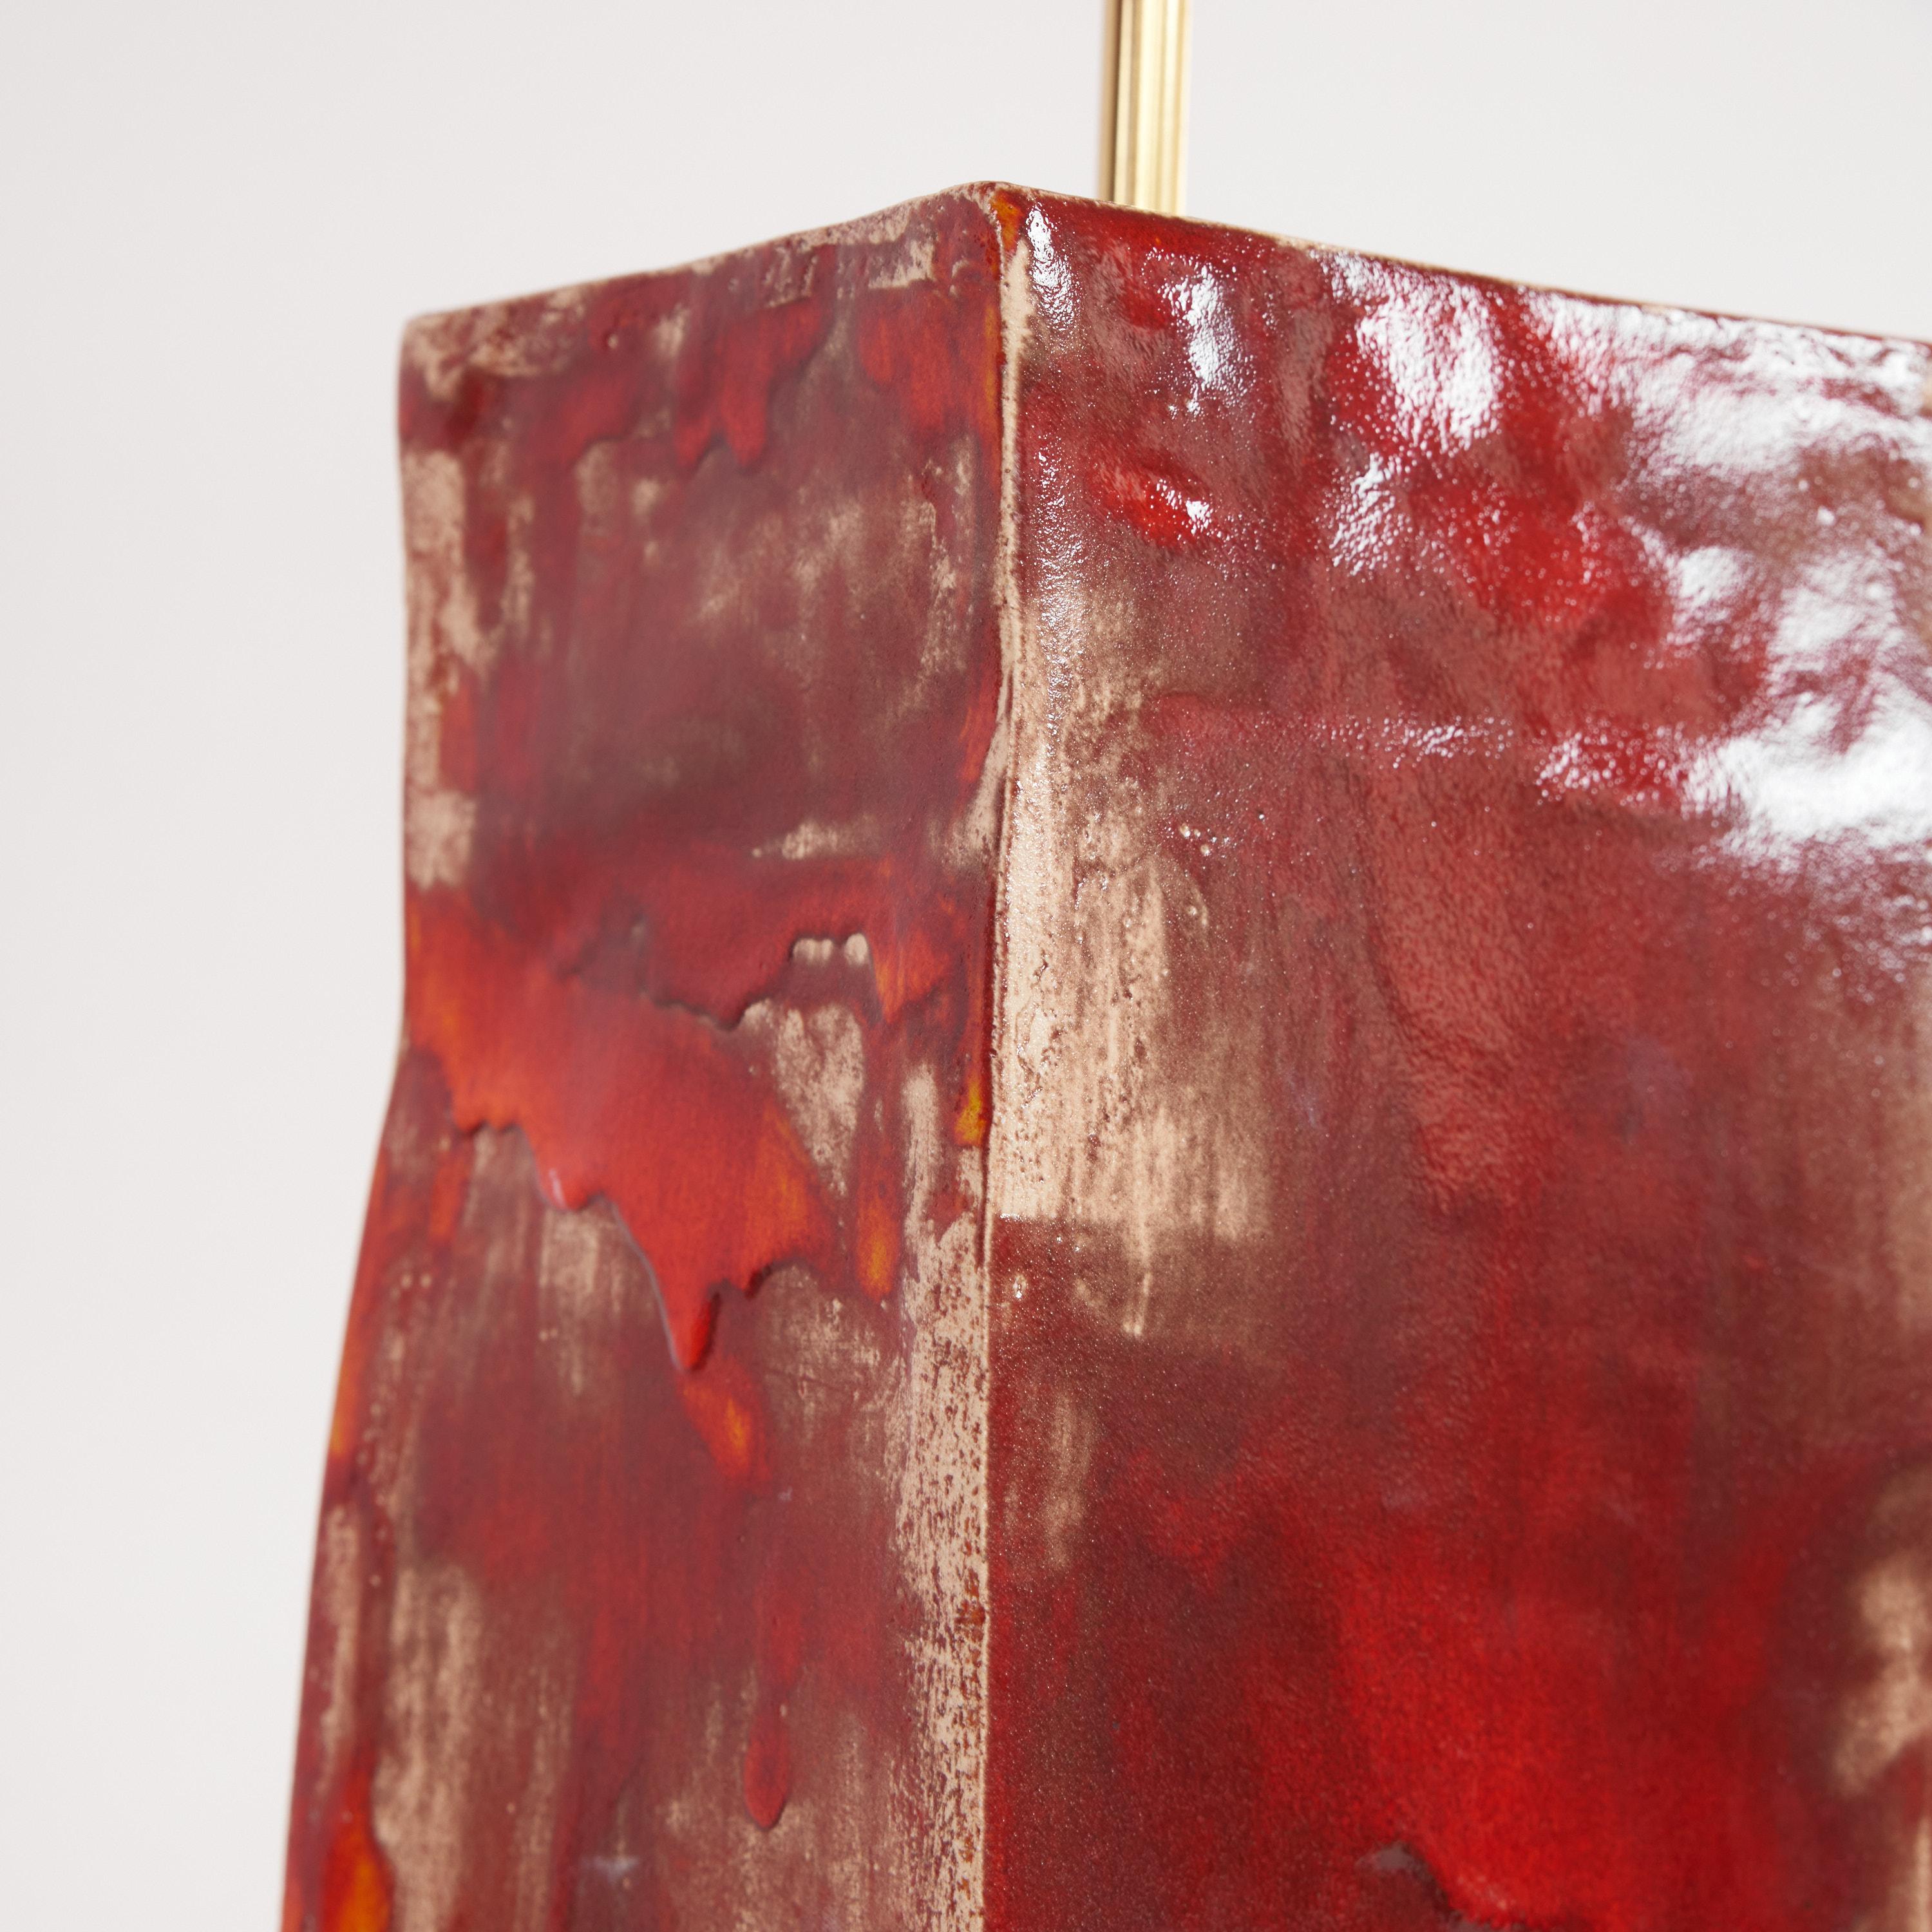 Hand-Crafted Rectangular Ceramic Lamp For Sale